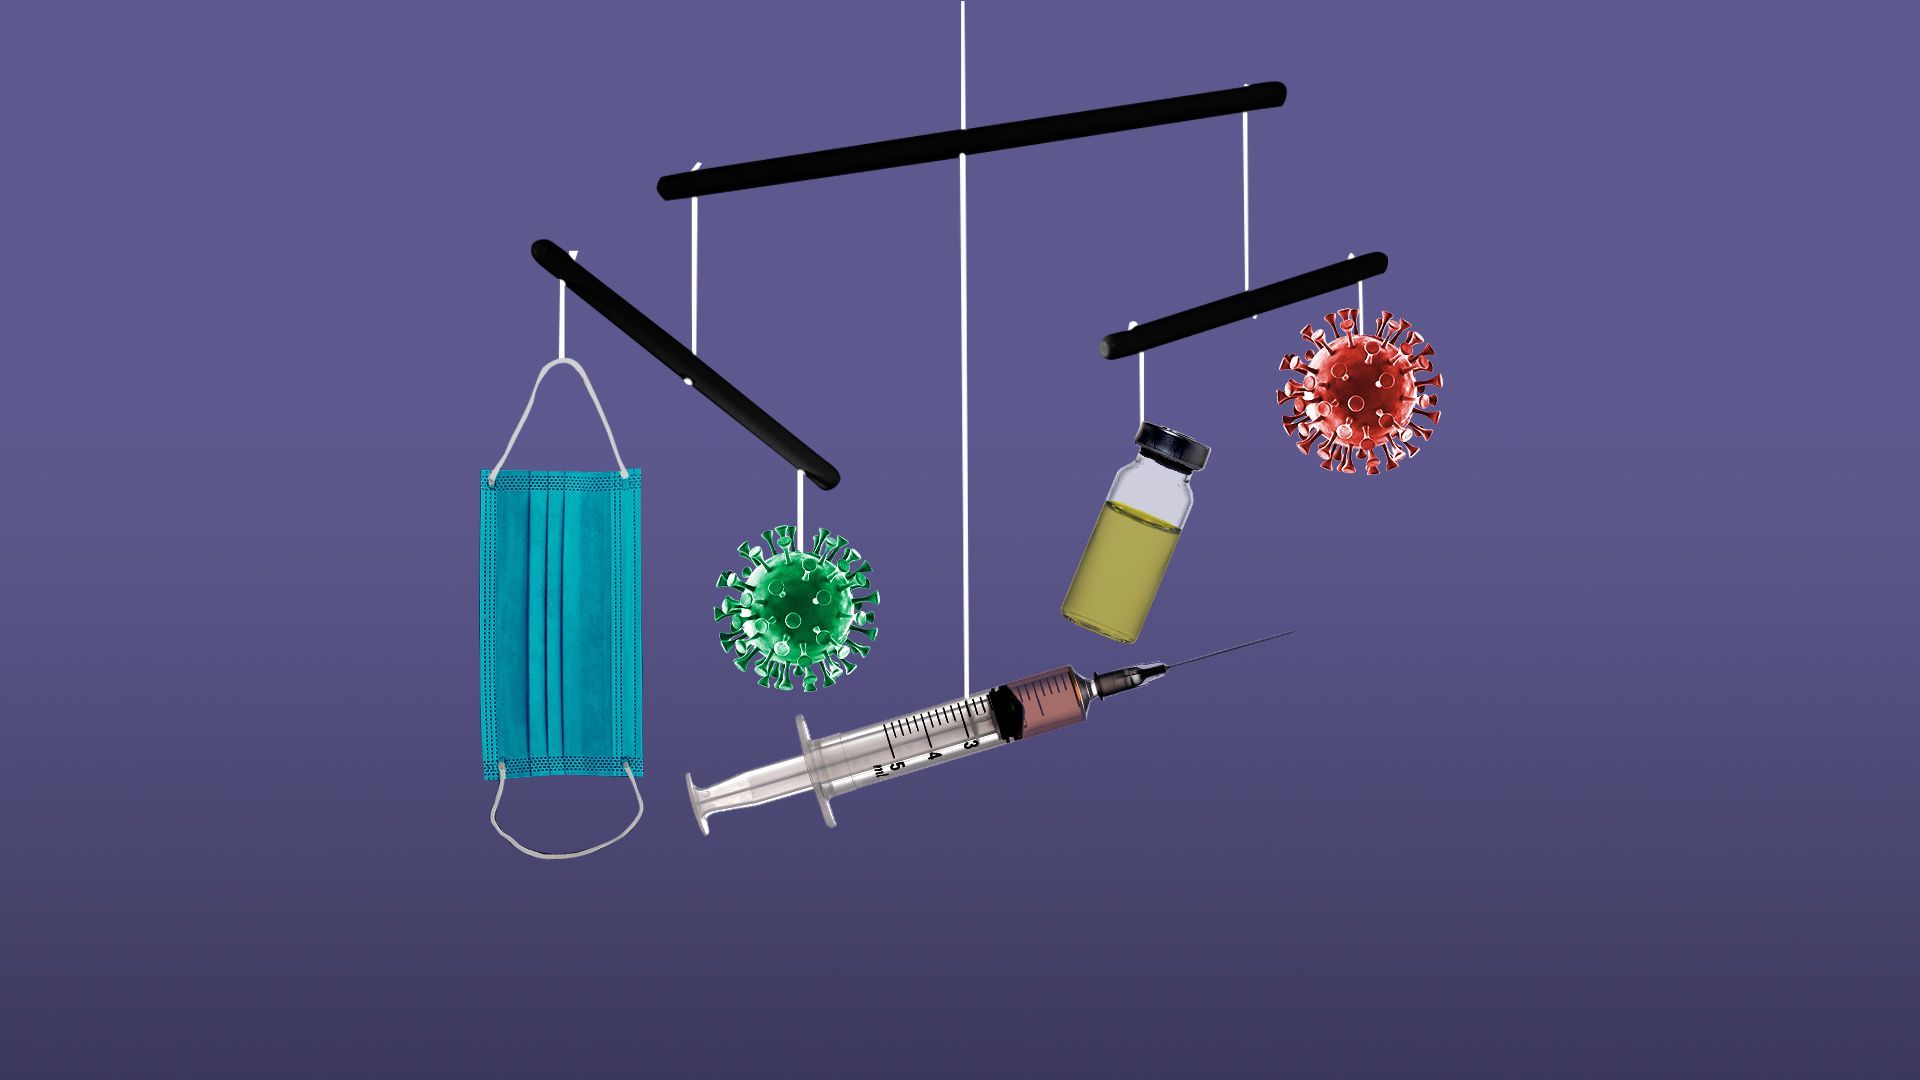 Illustration of a toy baby mobile with coronavirus cells, a syringe, a surgical mask and a vaccine vial all hanging from the strings.  